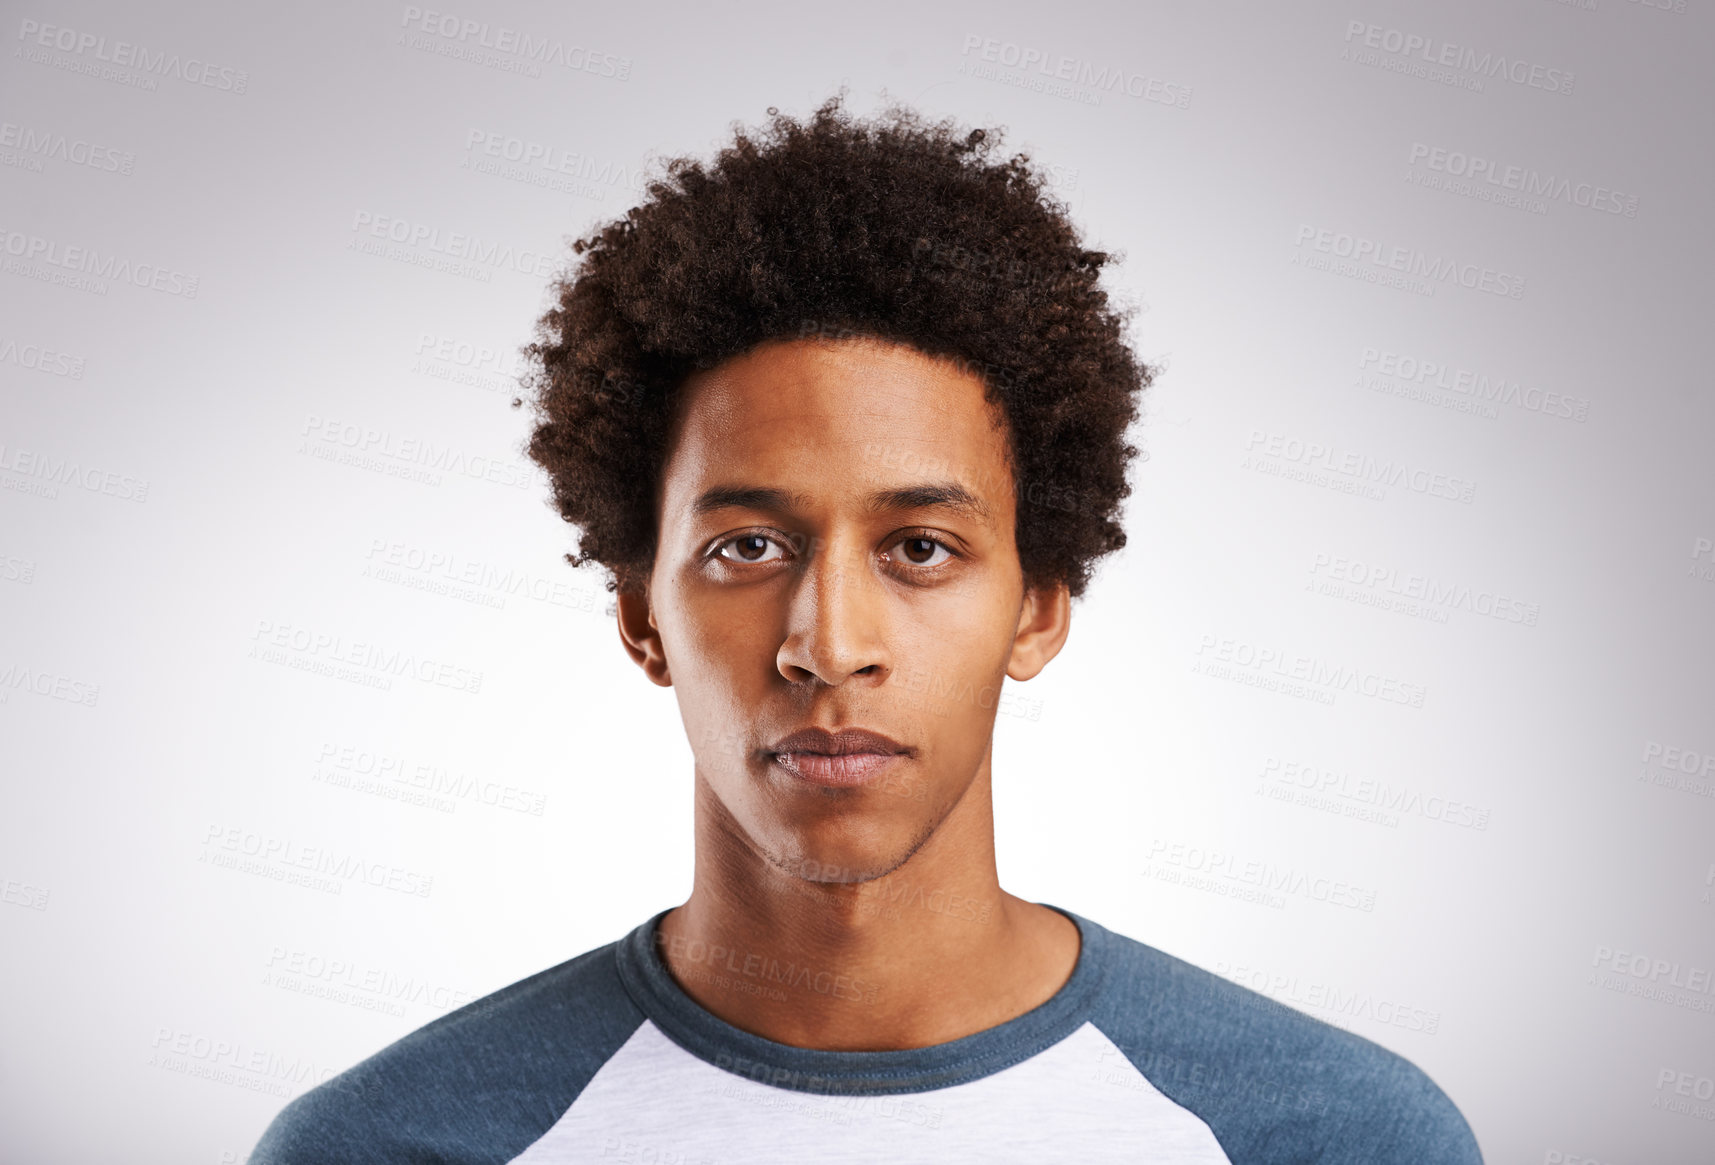 Buy stock photo Studio shot of a young man posing against a gray background